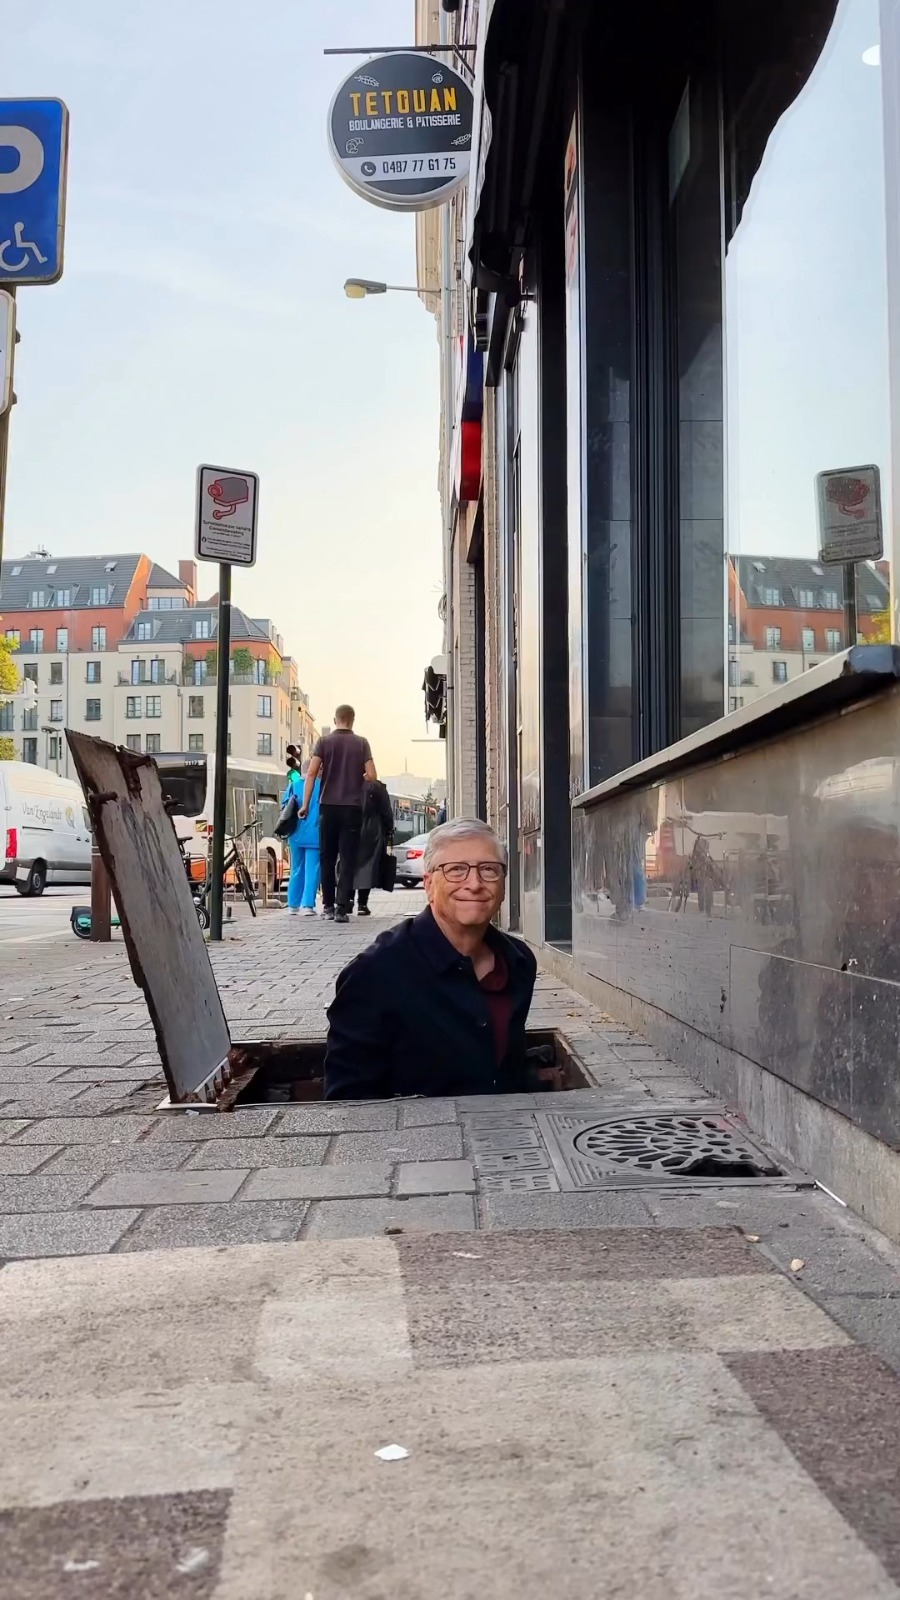 I explored the hidden history of Brussels’ sewage system